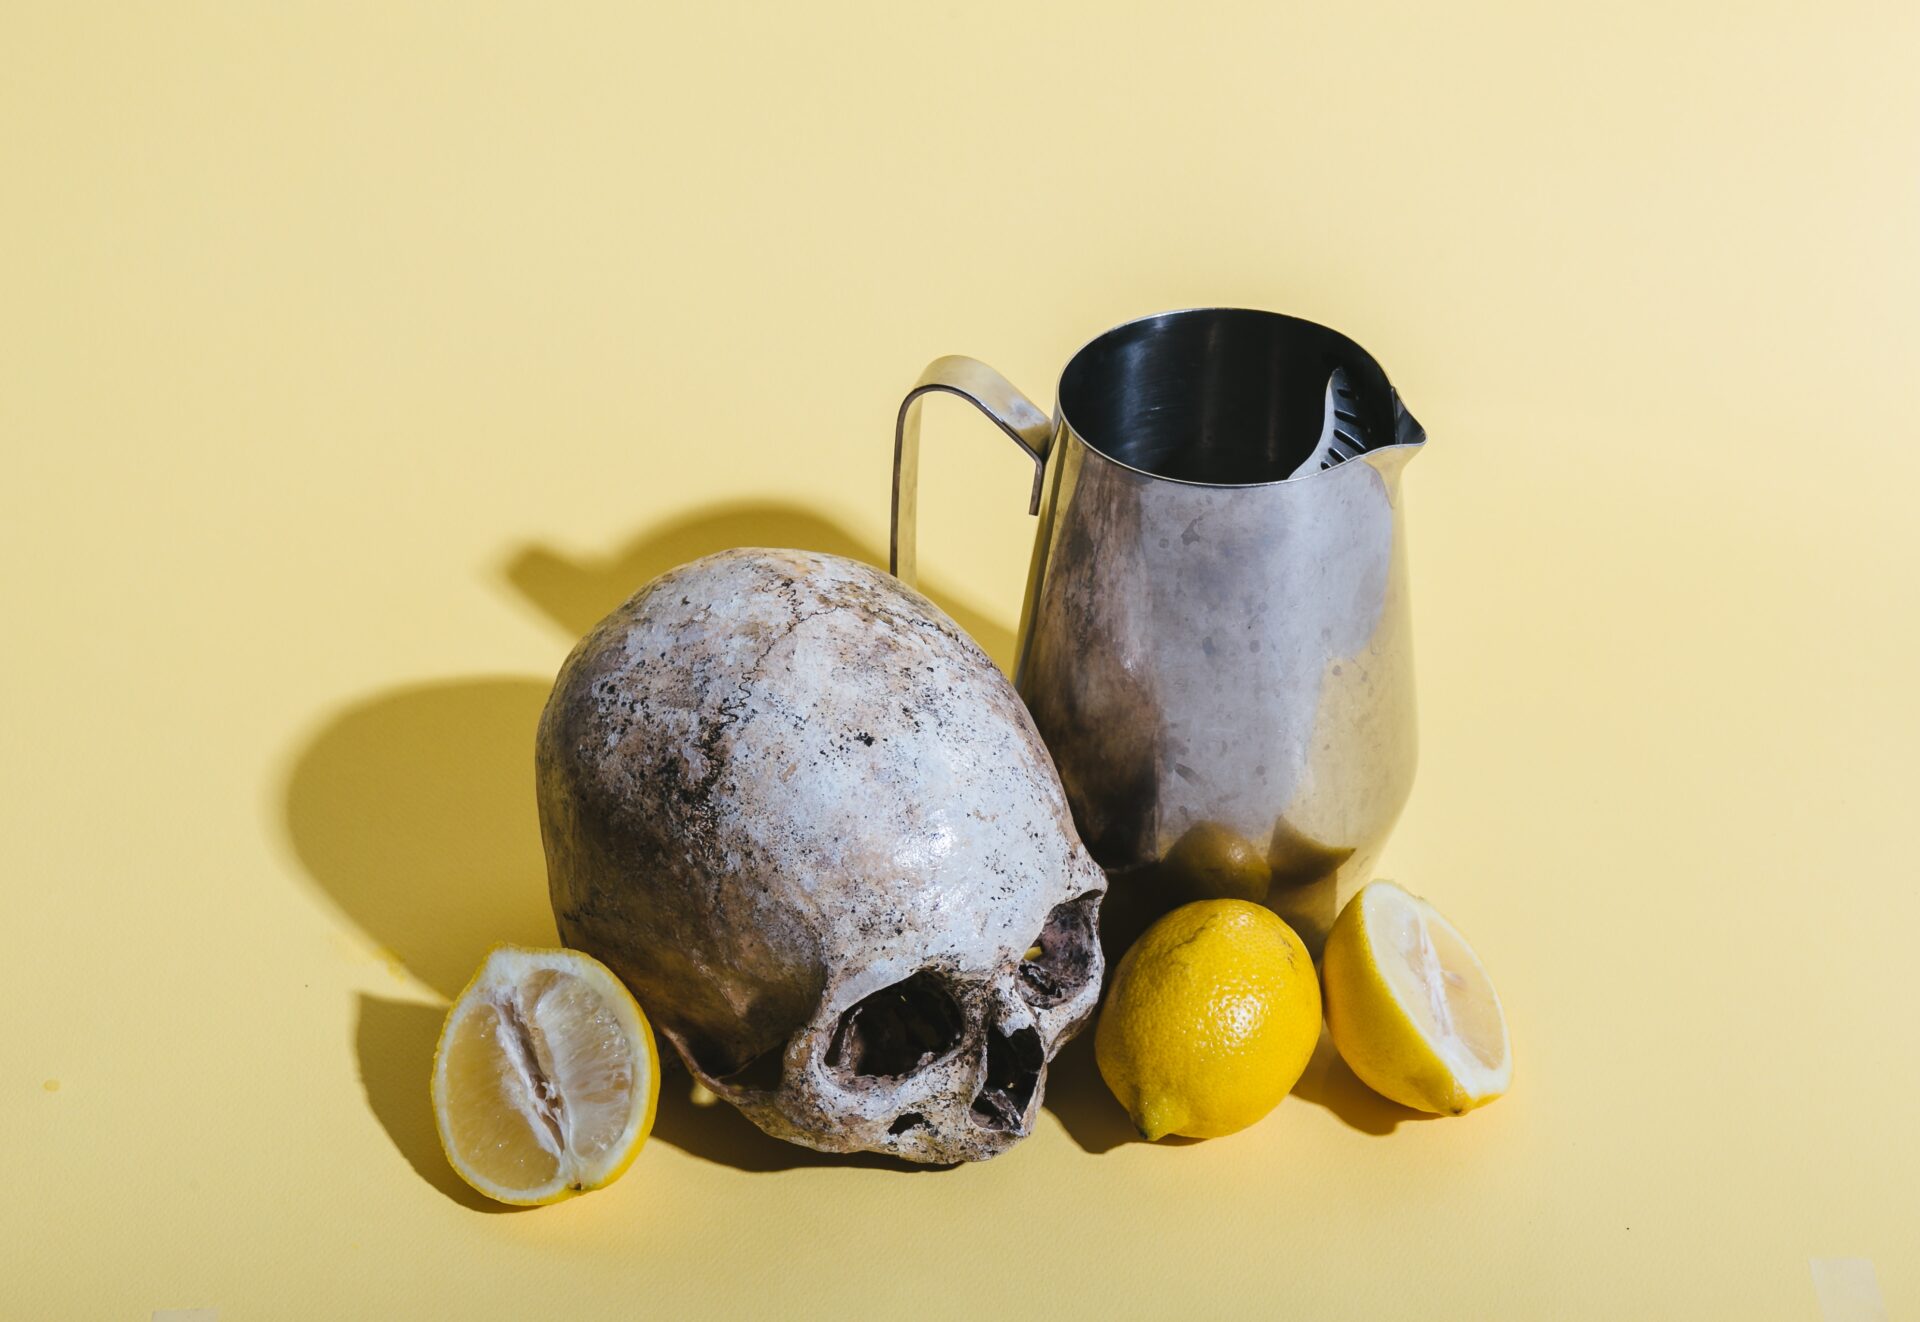 Not all brains are inclined to make lemonade from the lemons life hurls at us (Florencia Potter/Unsplash)